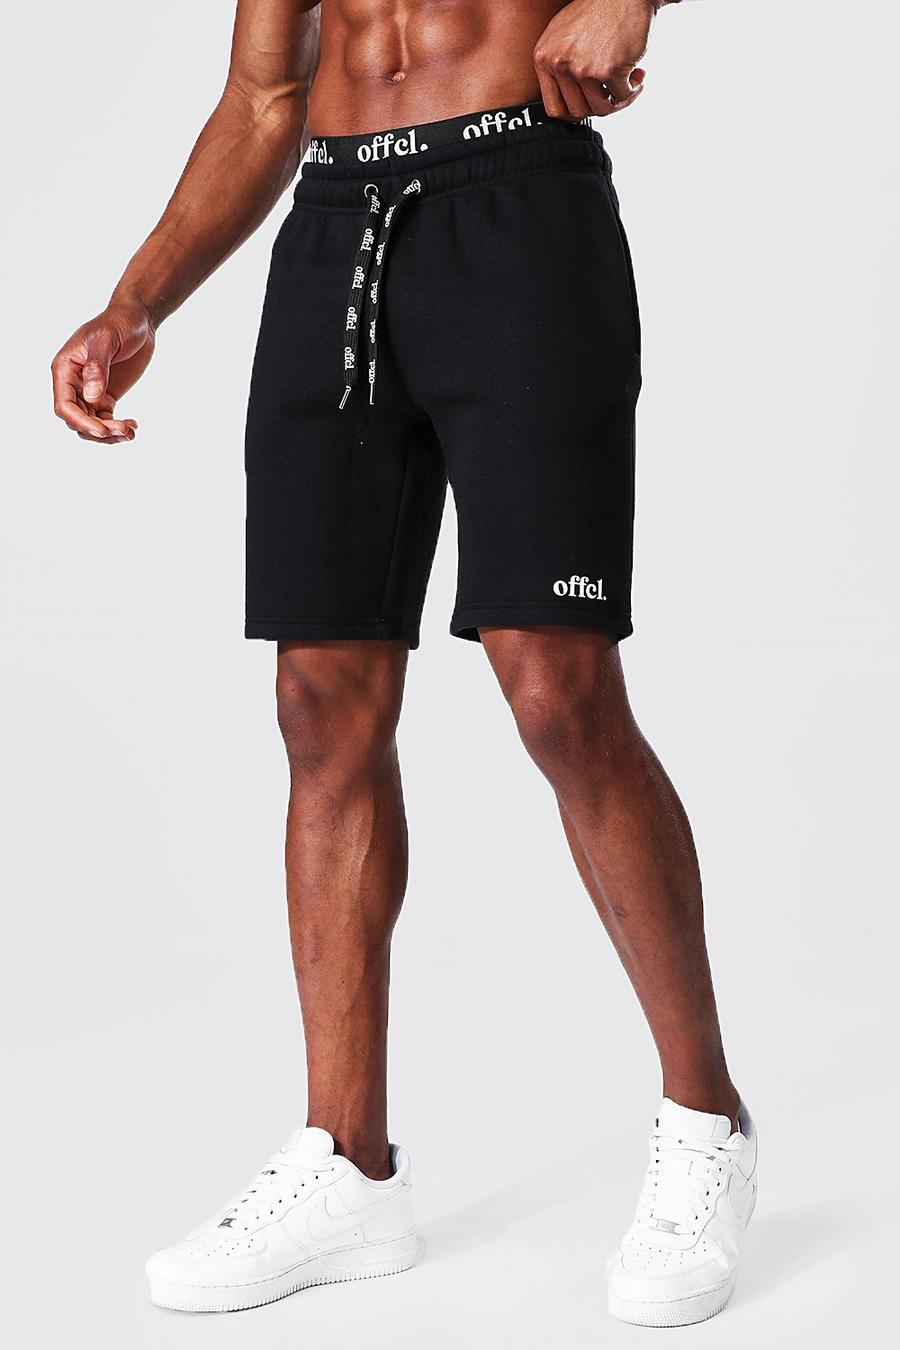 Black Offcl Waistband Slim Mid Jersey Short image number 1